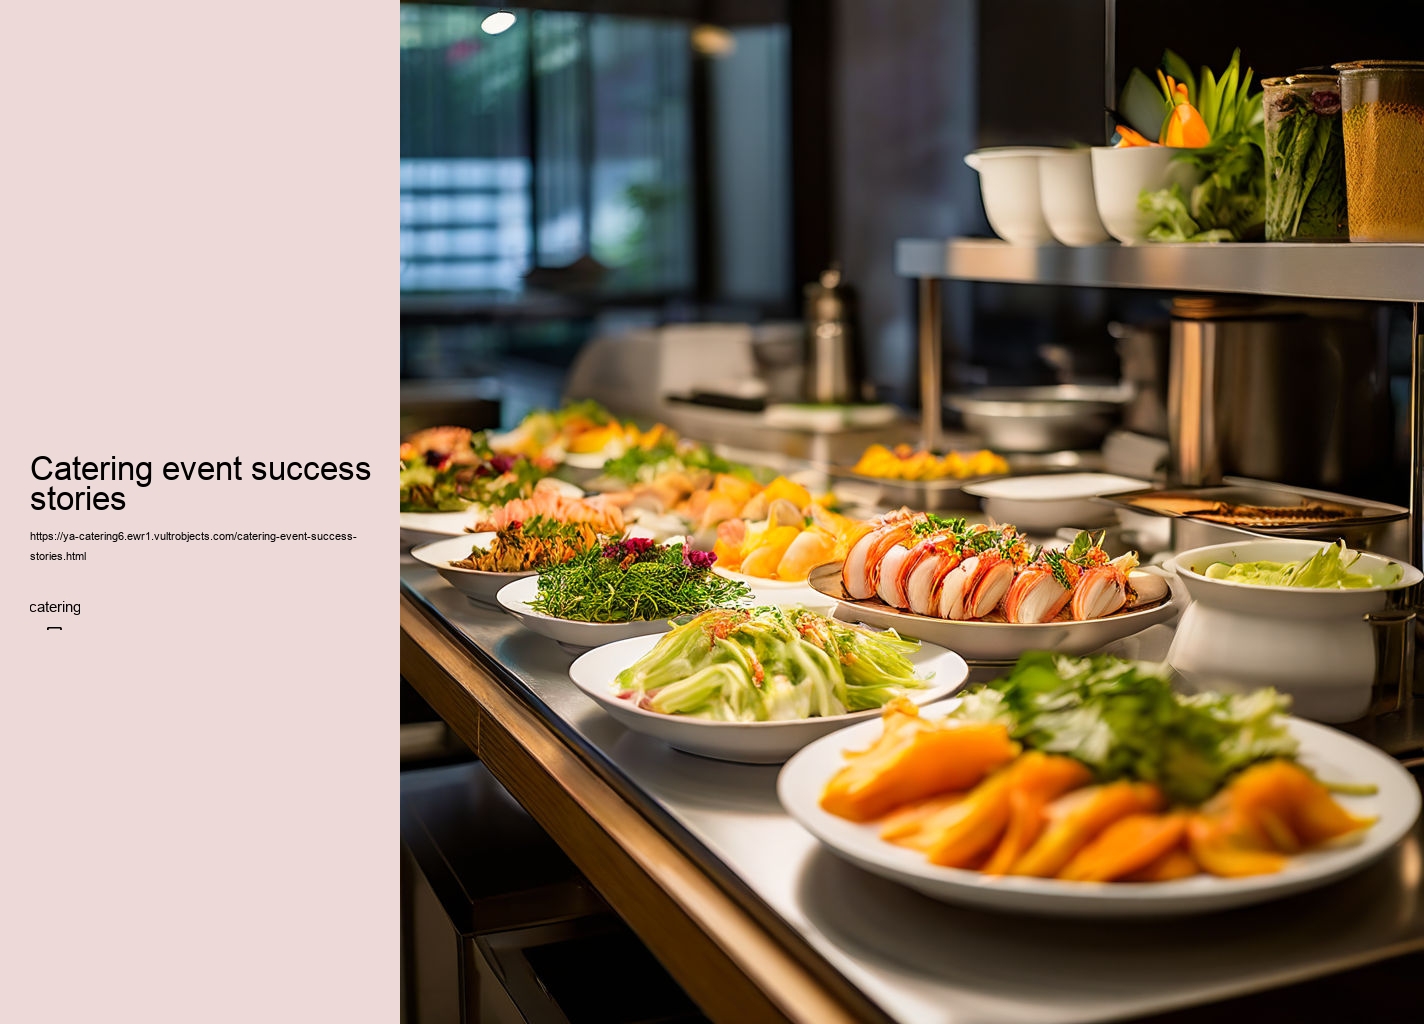 Catering event success stories